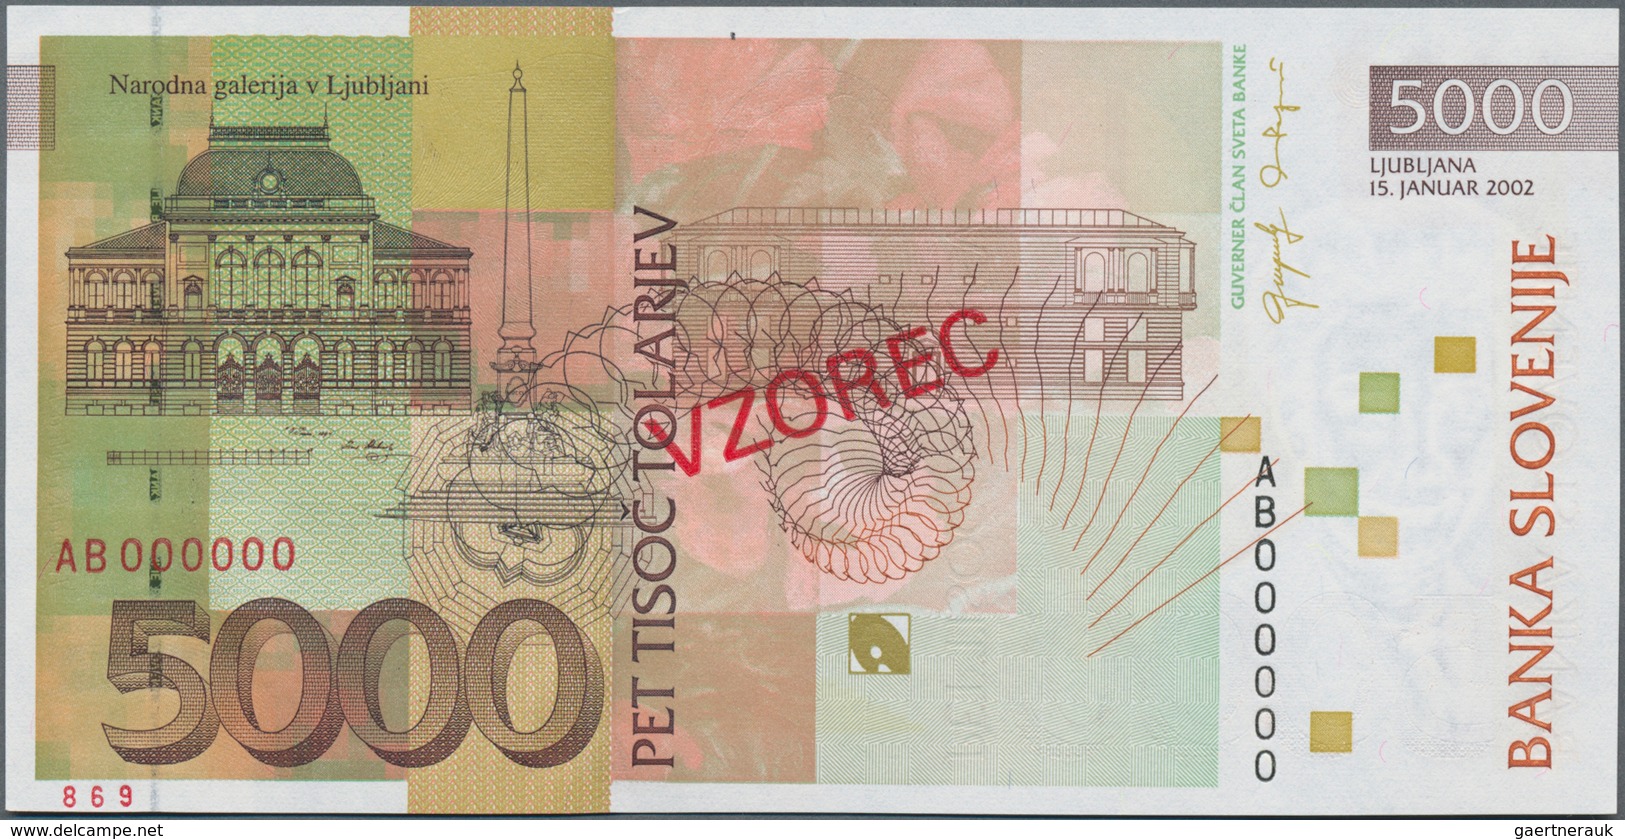 Slovenia / Slovenien: Banka Slovenije set with 6 banknotes with 200, 500, 2x 1000, 5000 and 10.000 T